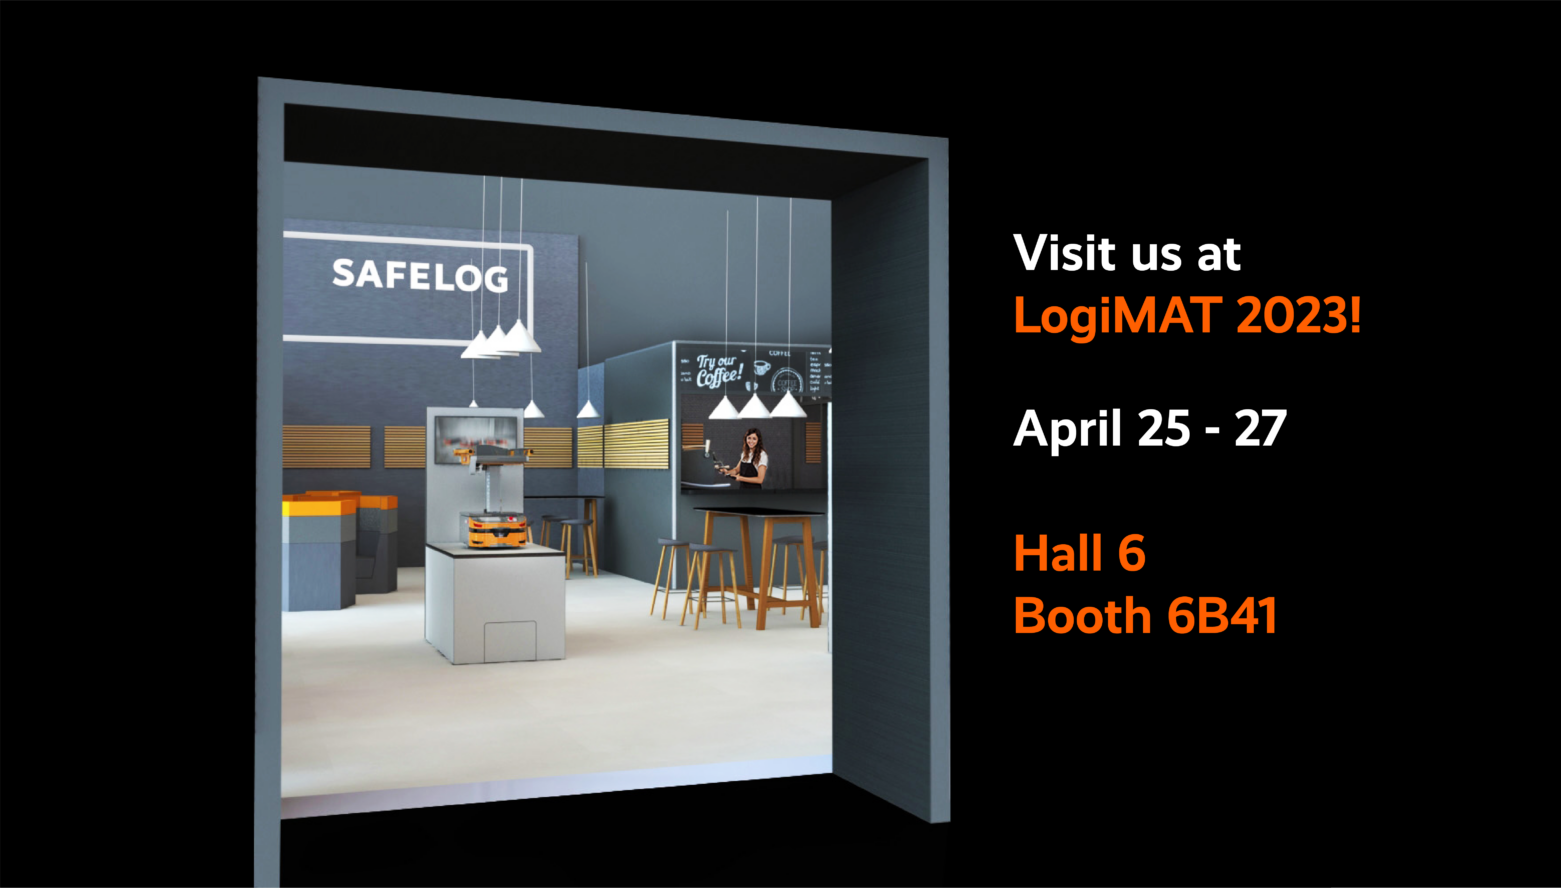 Everything’s new at LogiMAT